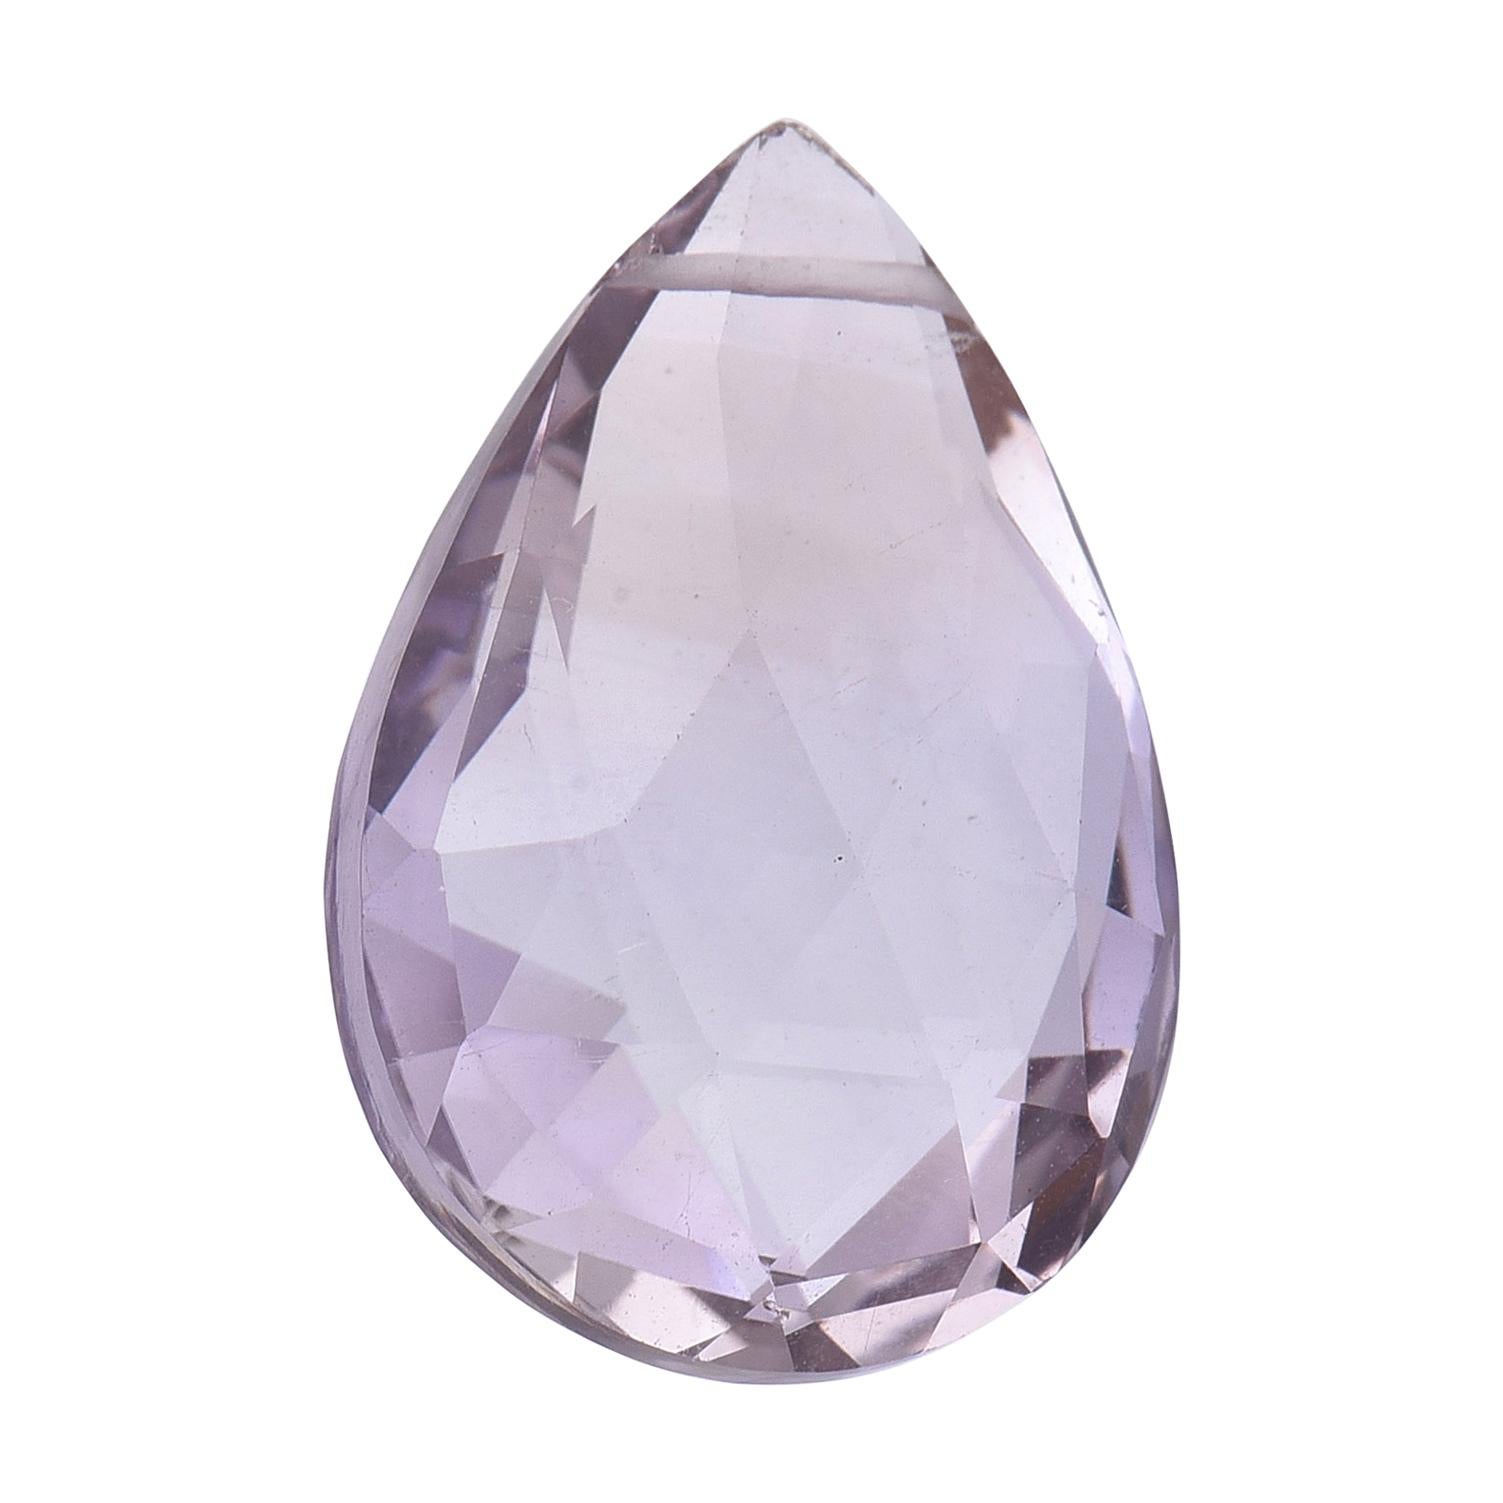 TJD Loose Natural Amethyst 11.55 Cts Pear Shape Gemstone for Any Jewellery